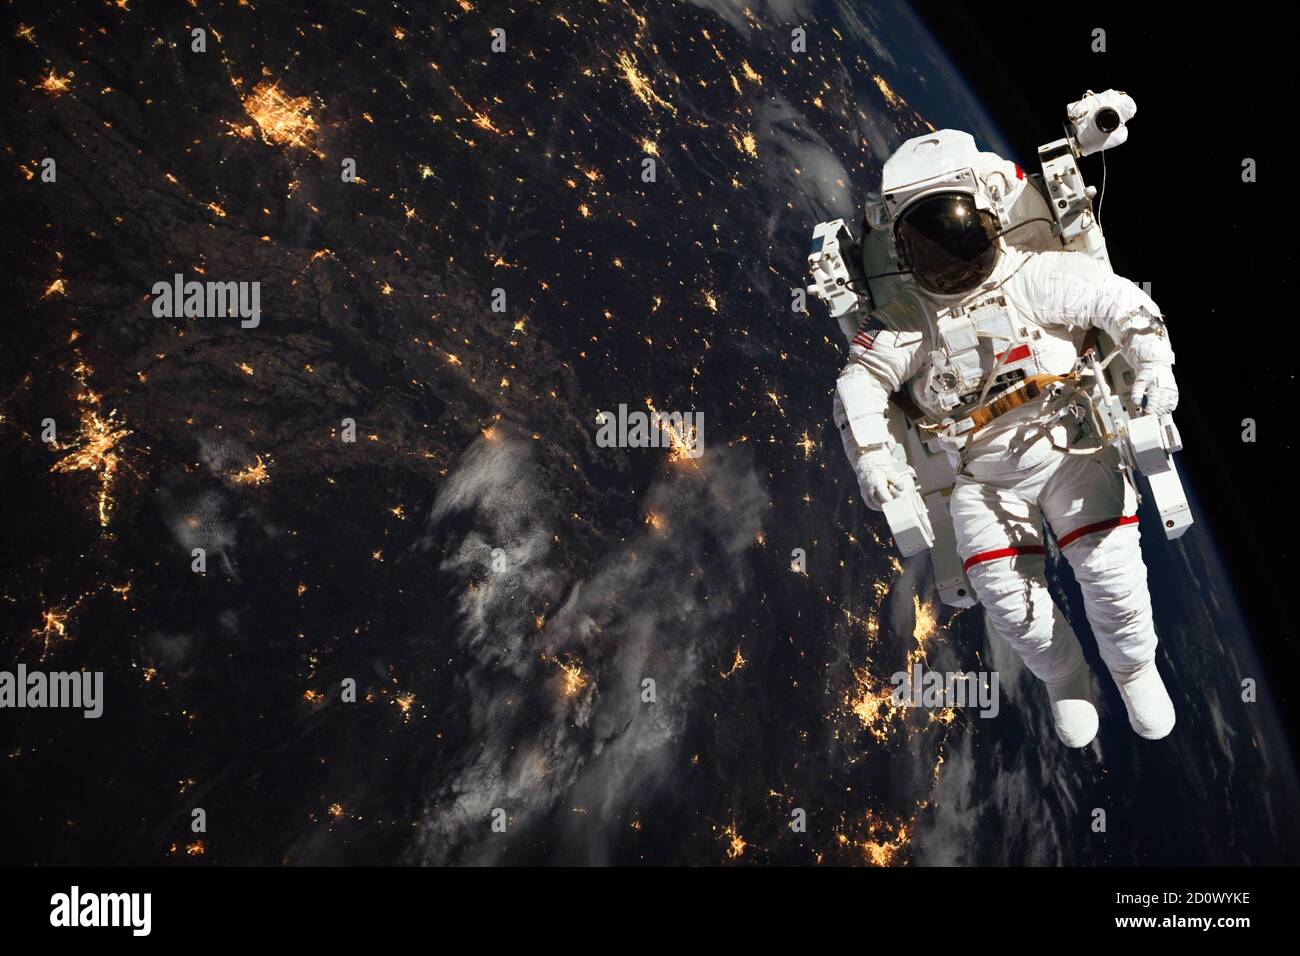 Astronaut walking in space with earth at night background. Elements of this image furnished by NASA. Stock Photo